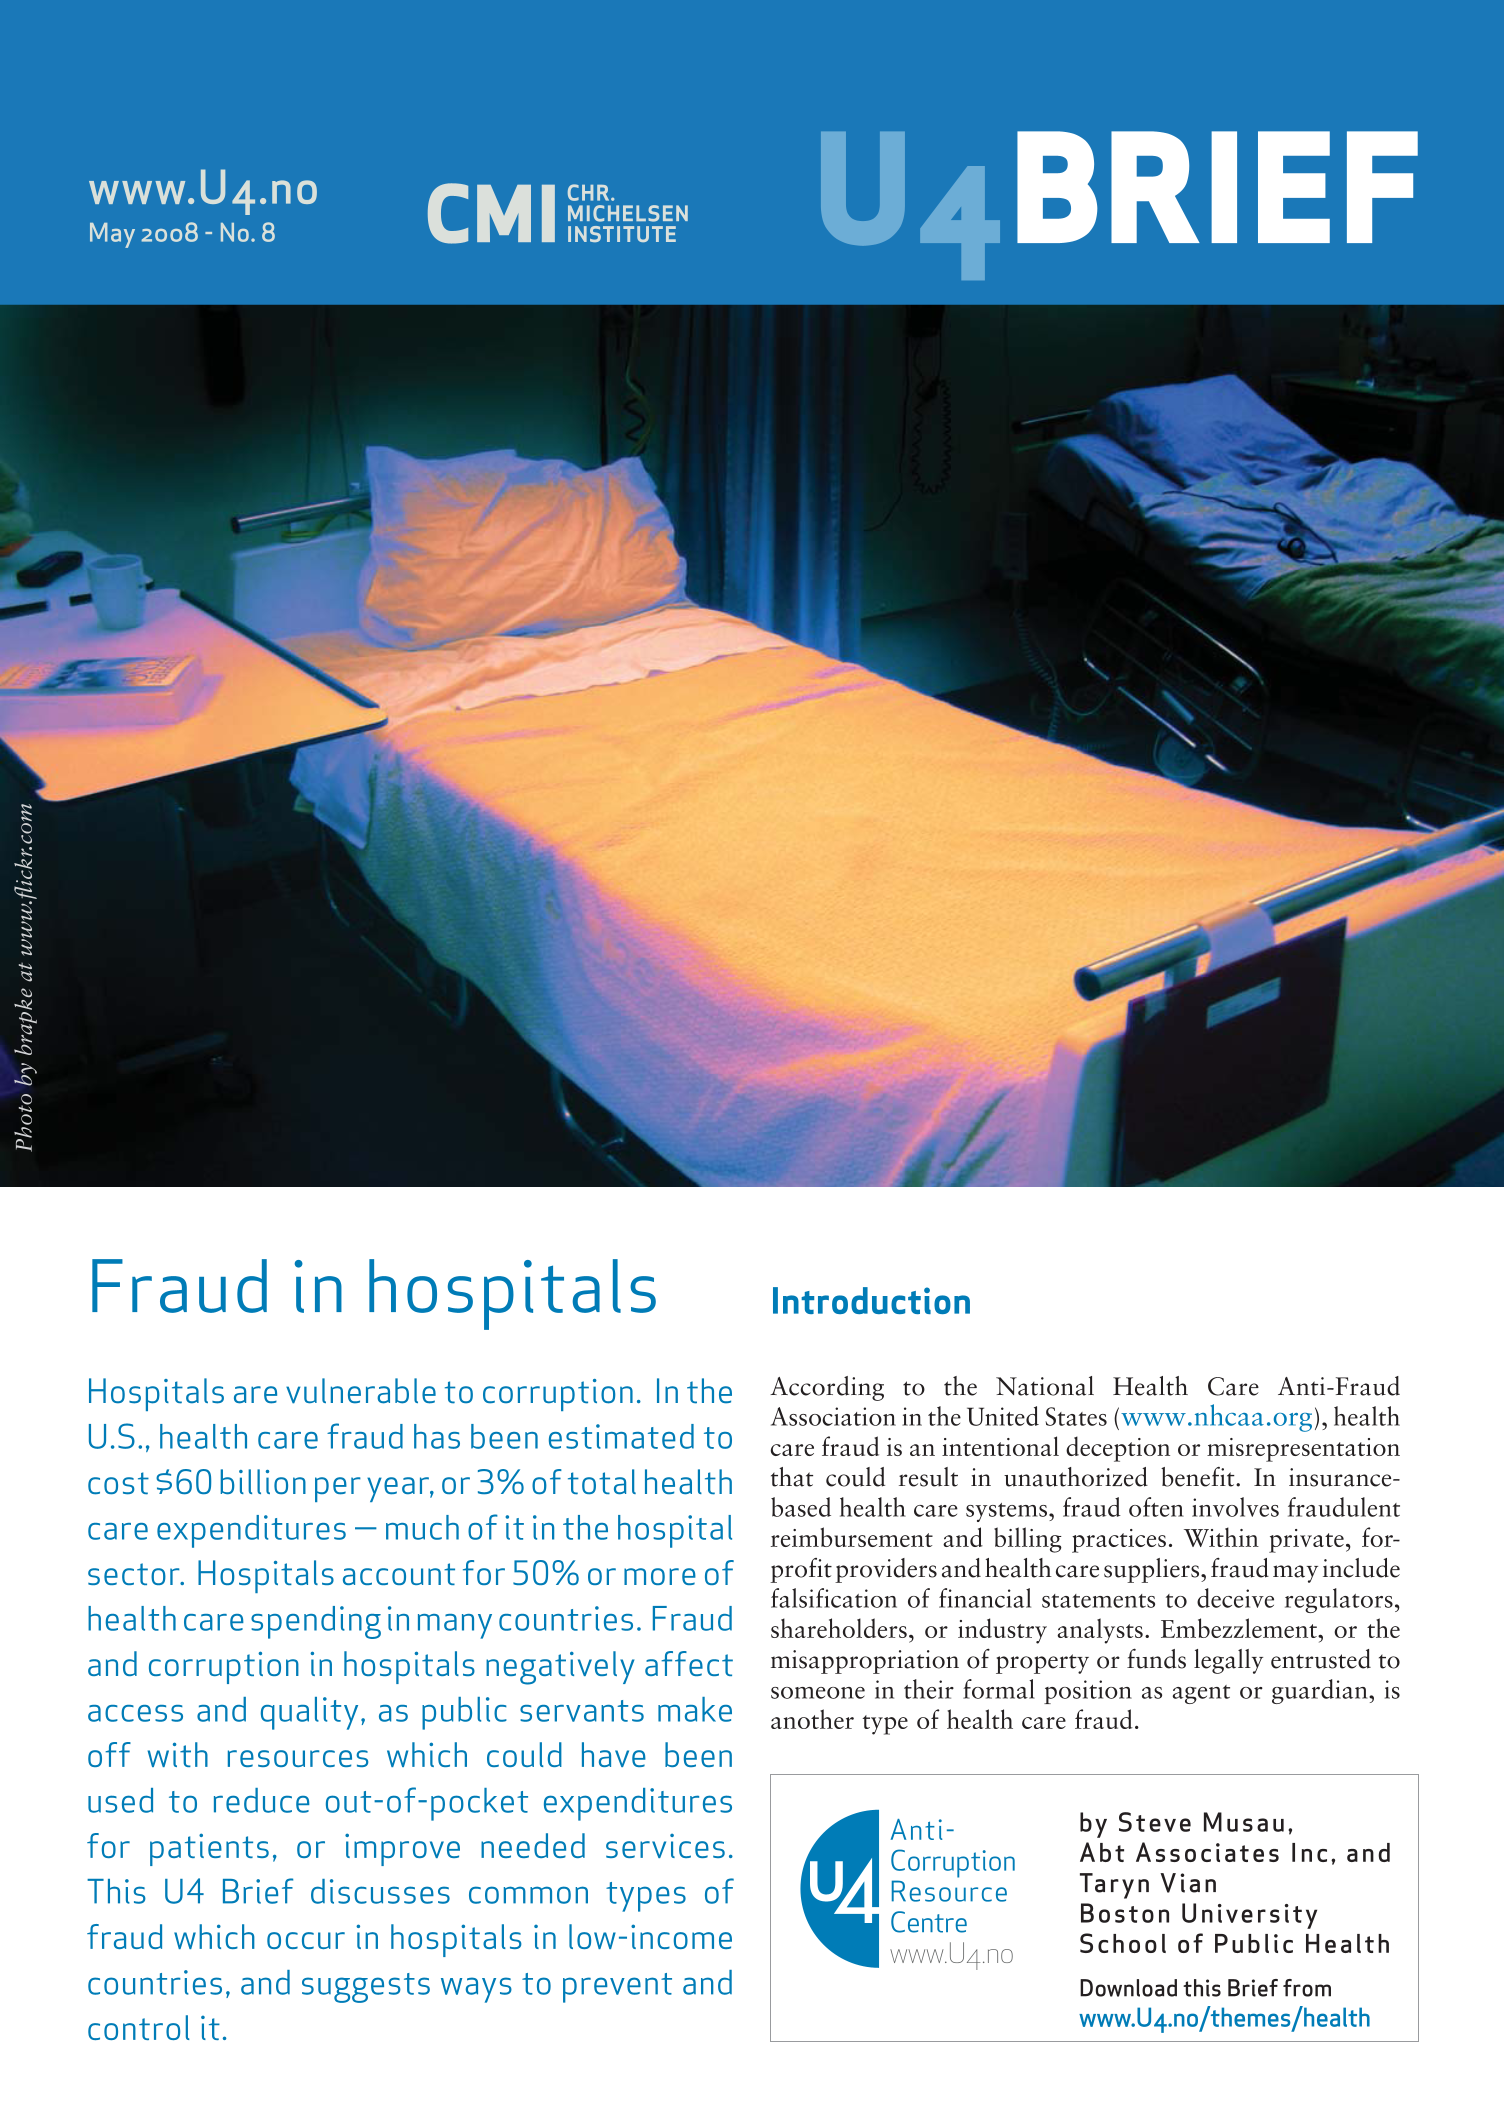 Fraud in hospitals